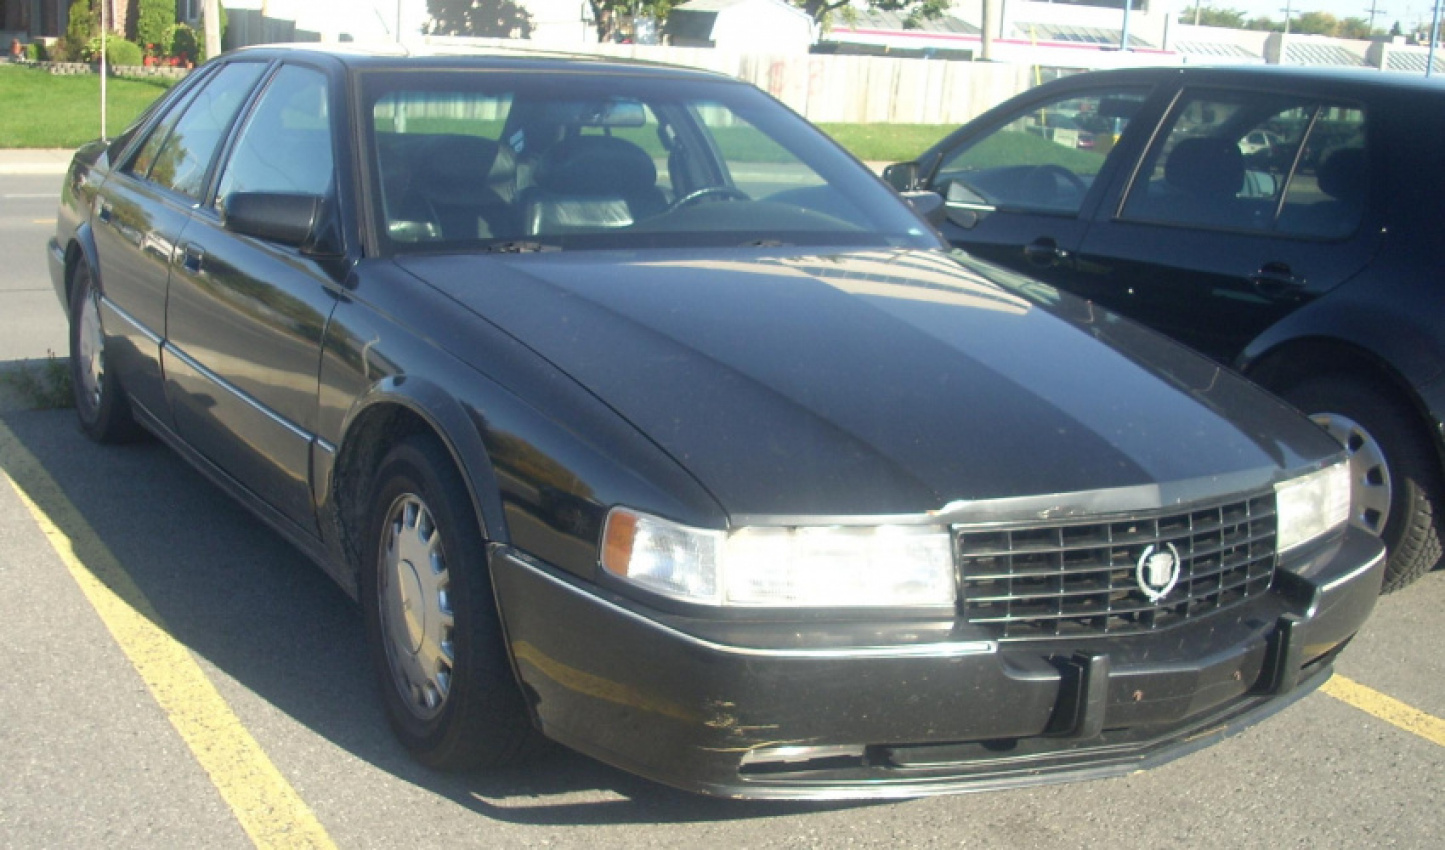 autos, cadillac, cars, classic cars, 1990s, year in review, cadillac seville 1995